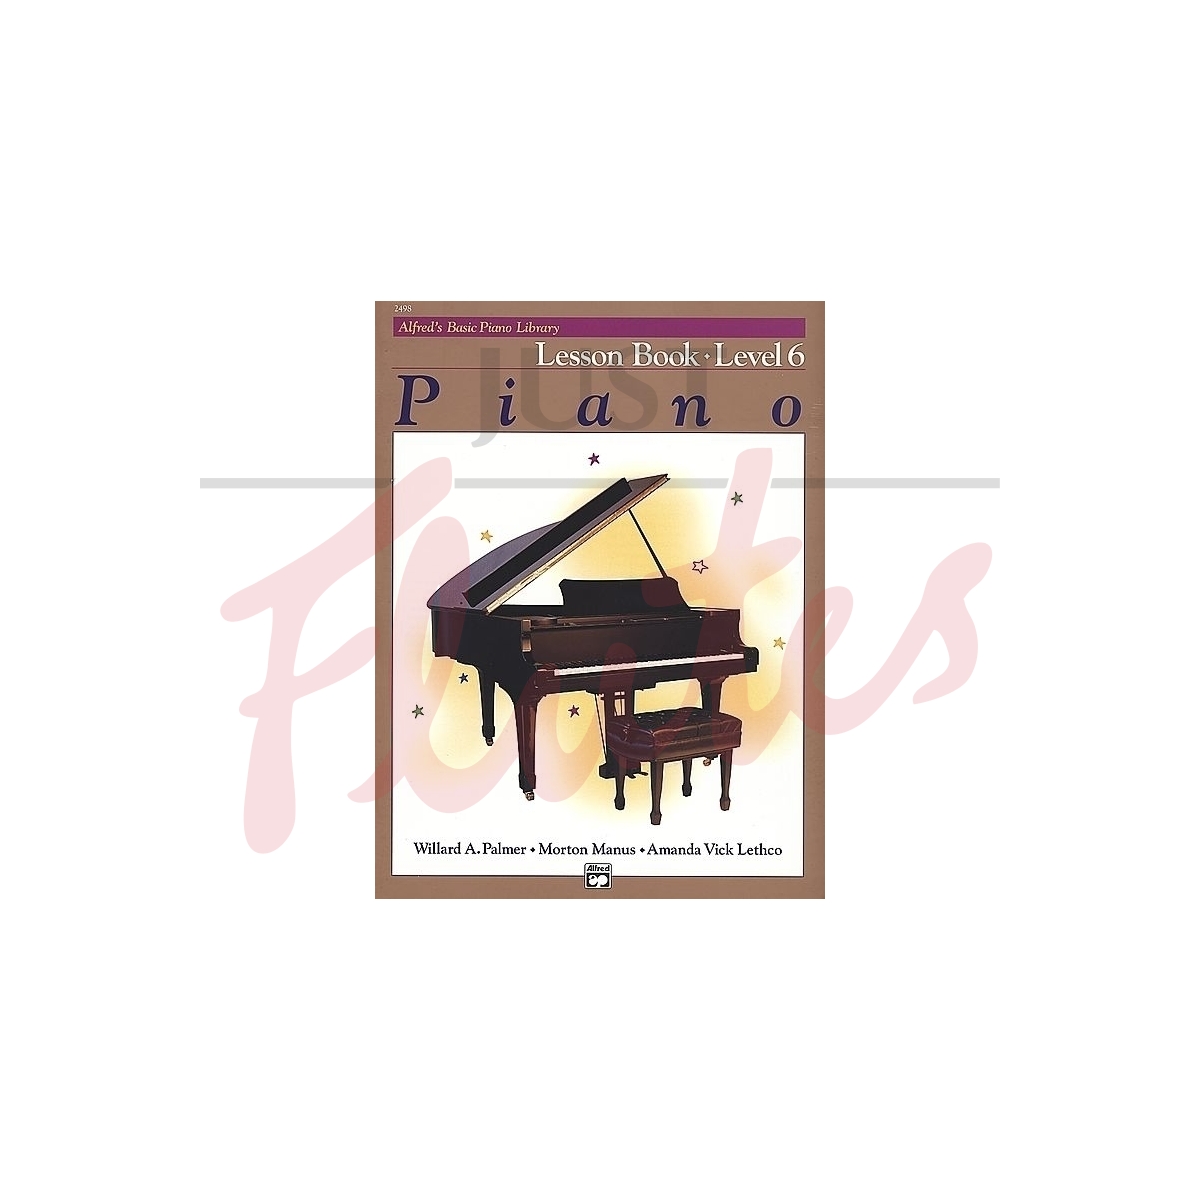 Alfred's Basic Piano Library: Lesson Book Level 6